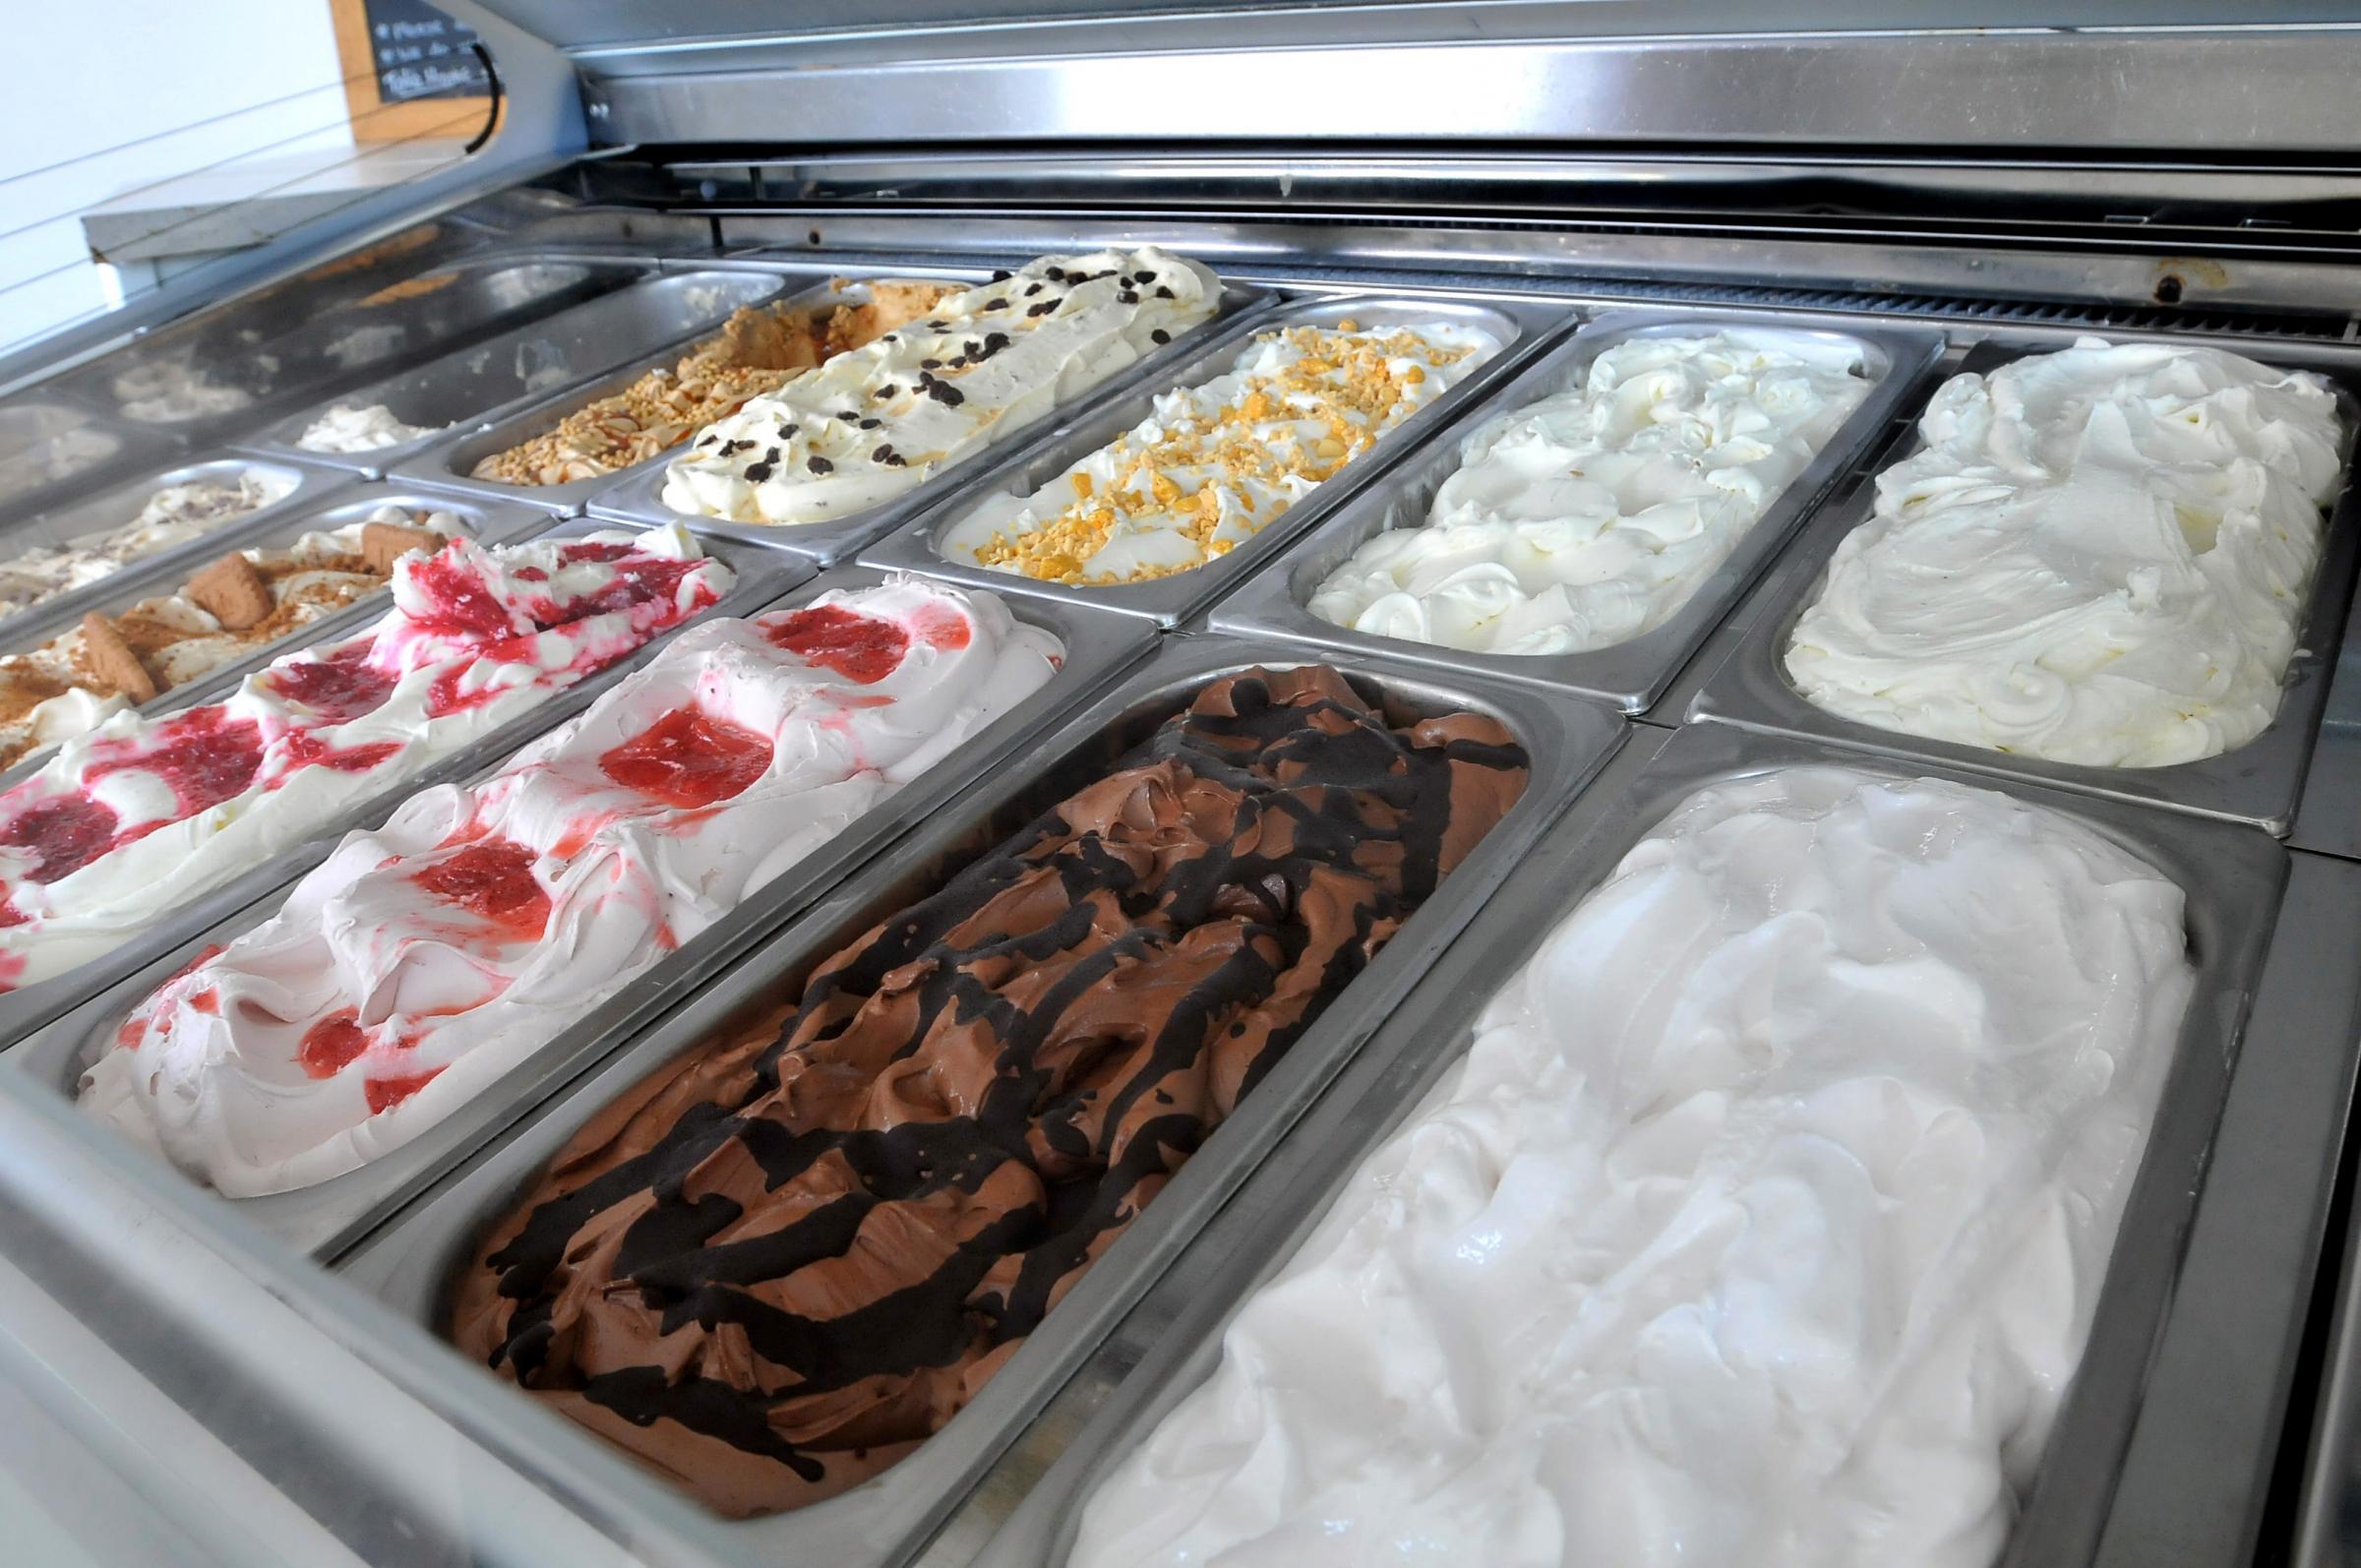 The shop stocks 12 flavours and six flavours are rotated either weekly or monthly